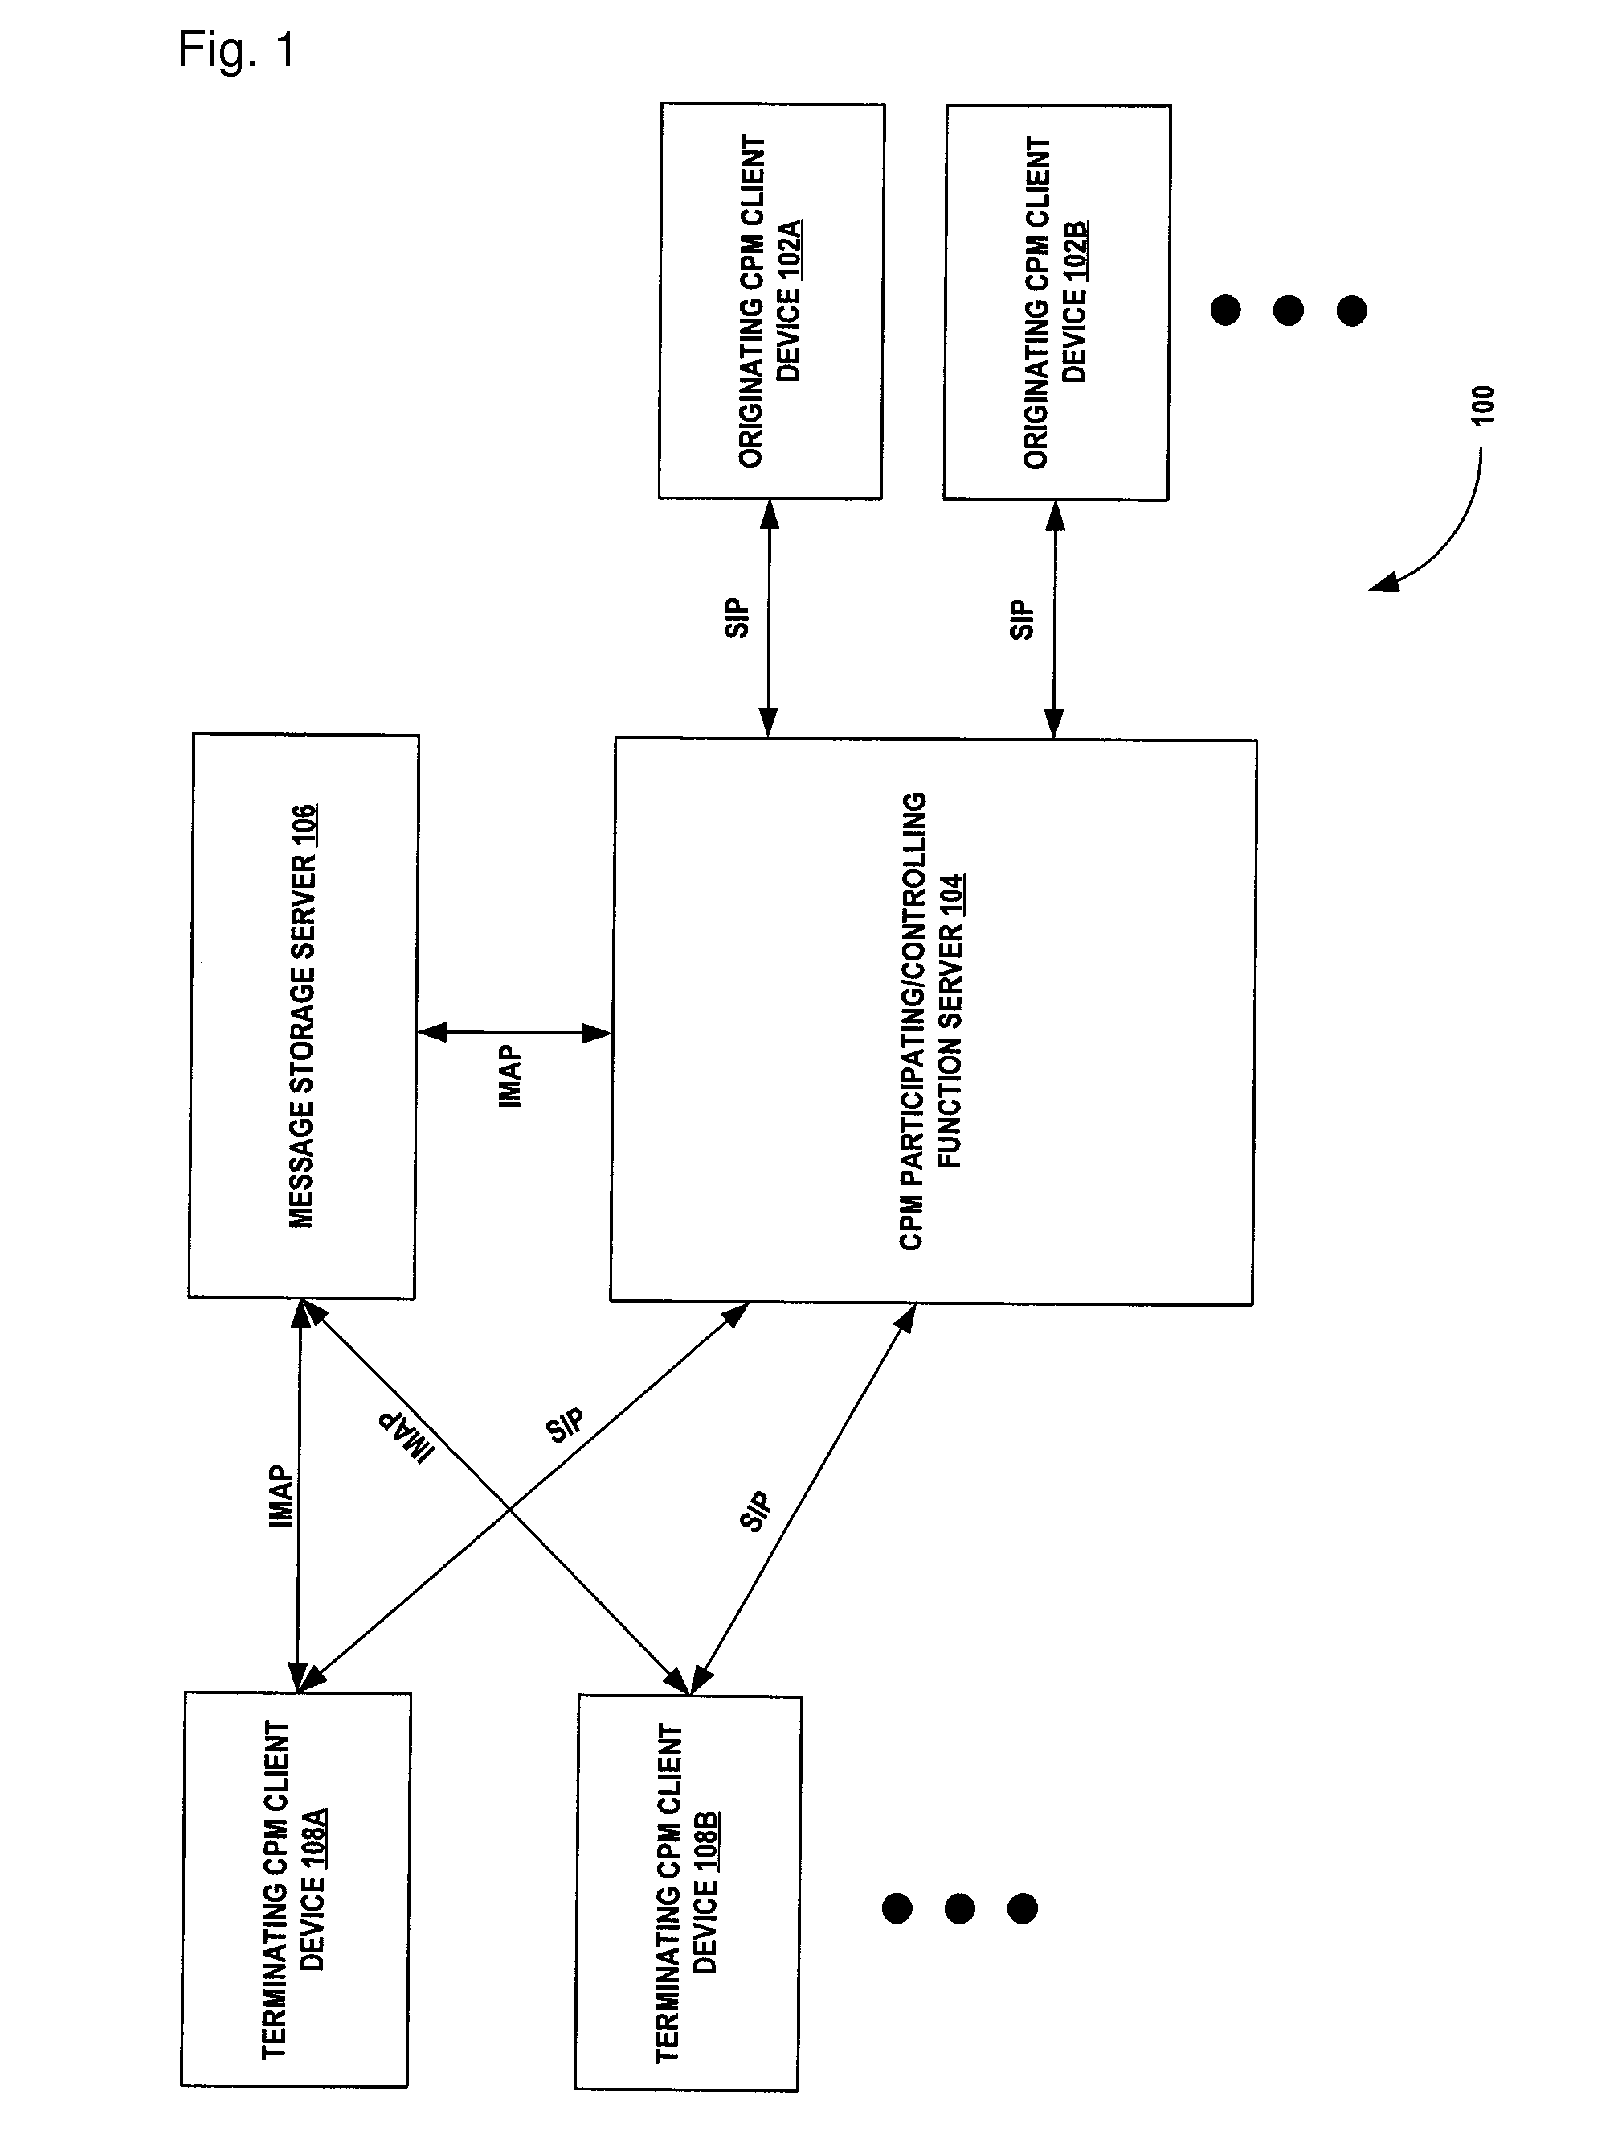 System and method of handling read and delivery confirmations for messages